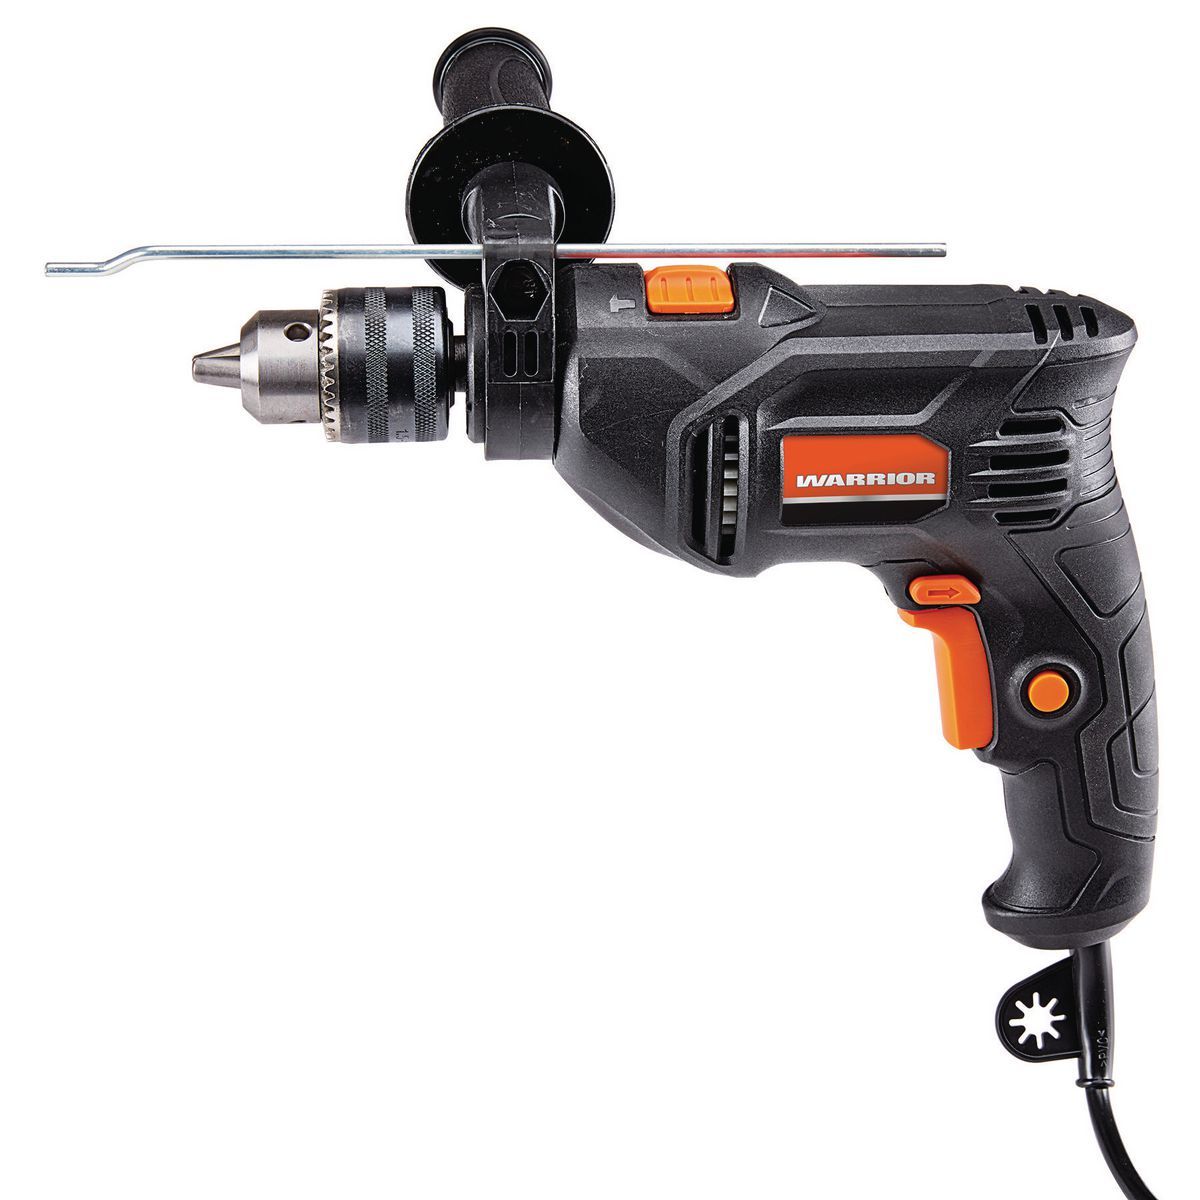 4.5 Amp 1/2 in. Single Speed Hammer Drill/Driver on Sale At Harbor Freight Tools